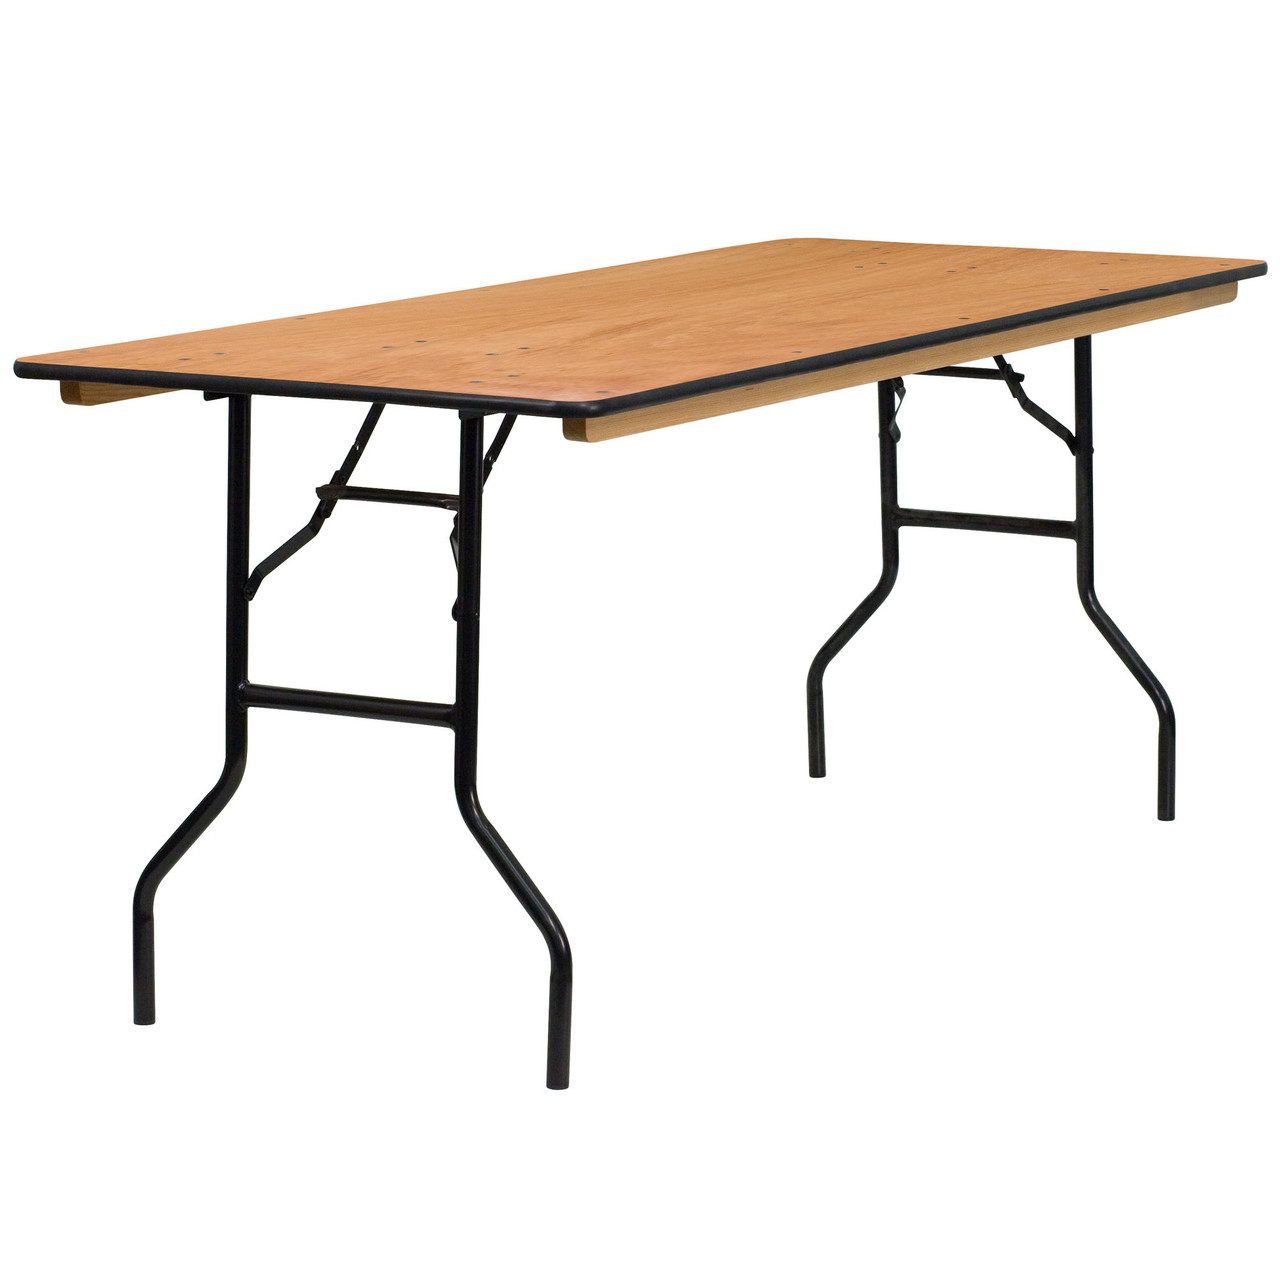 30 X 72 Wood Folding Banquet Table 6 Ft Folding Tables